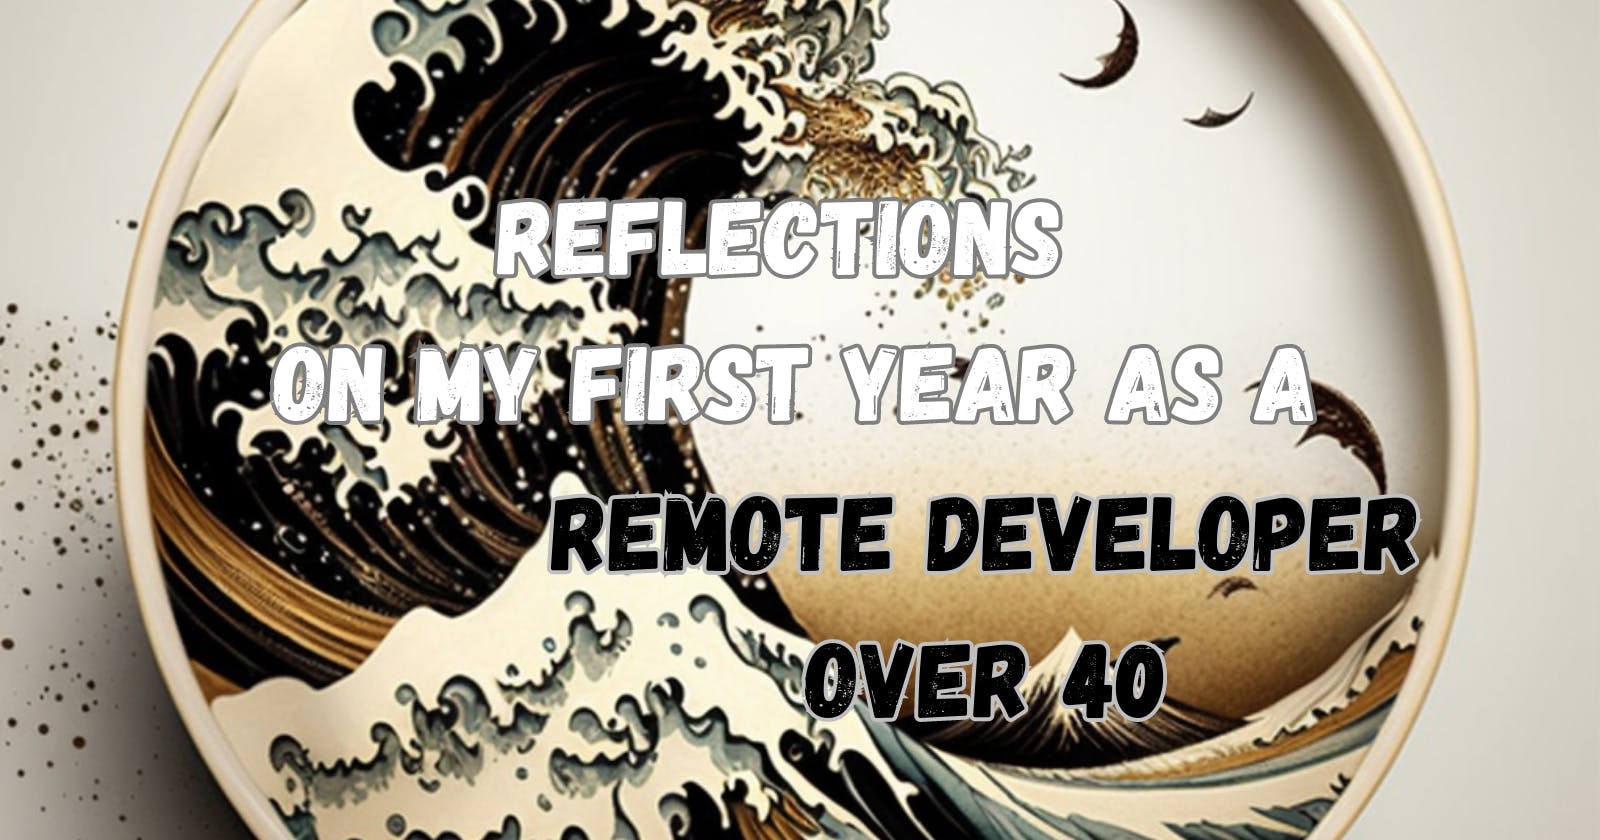 Lessons Learned: Reflections on my first year as a remote developer over 40.